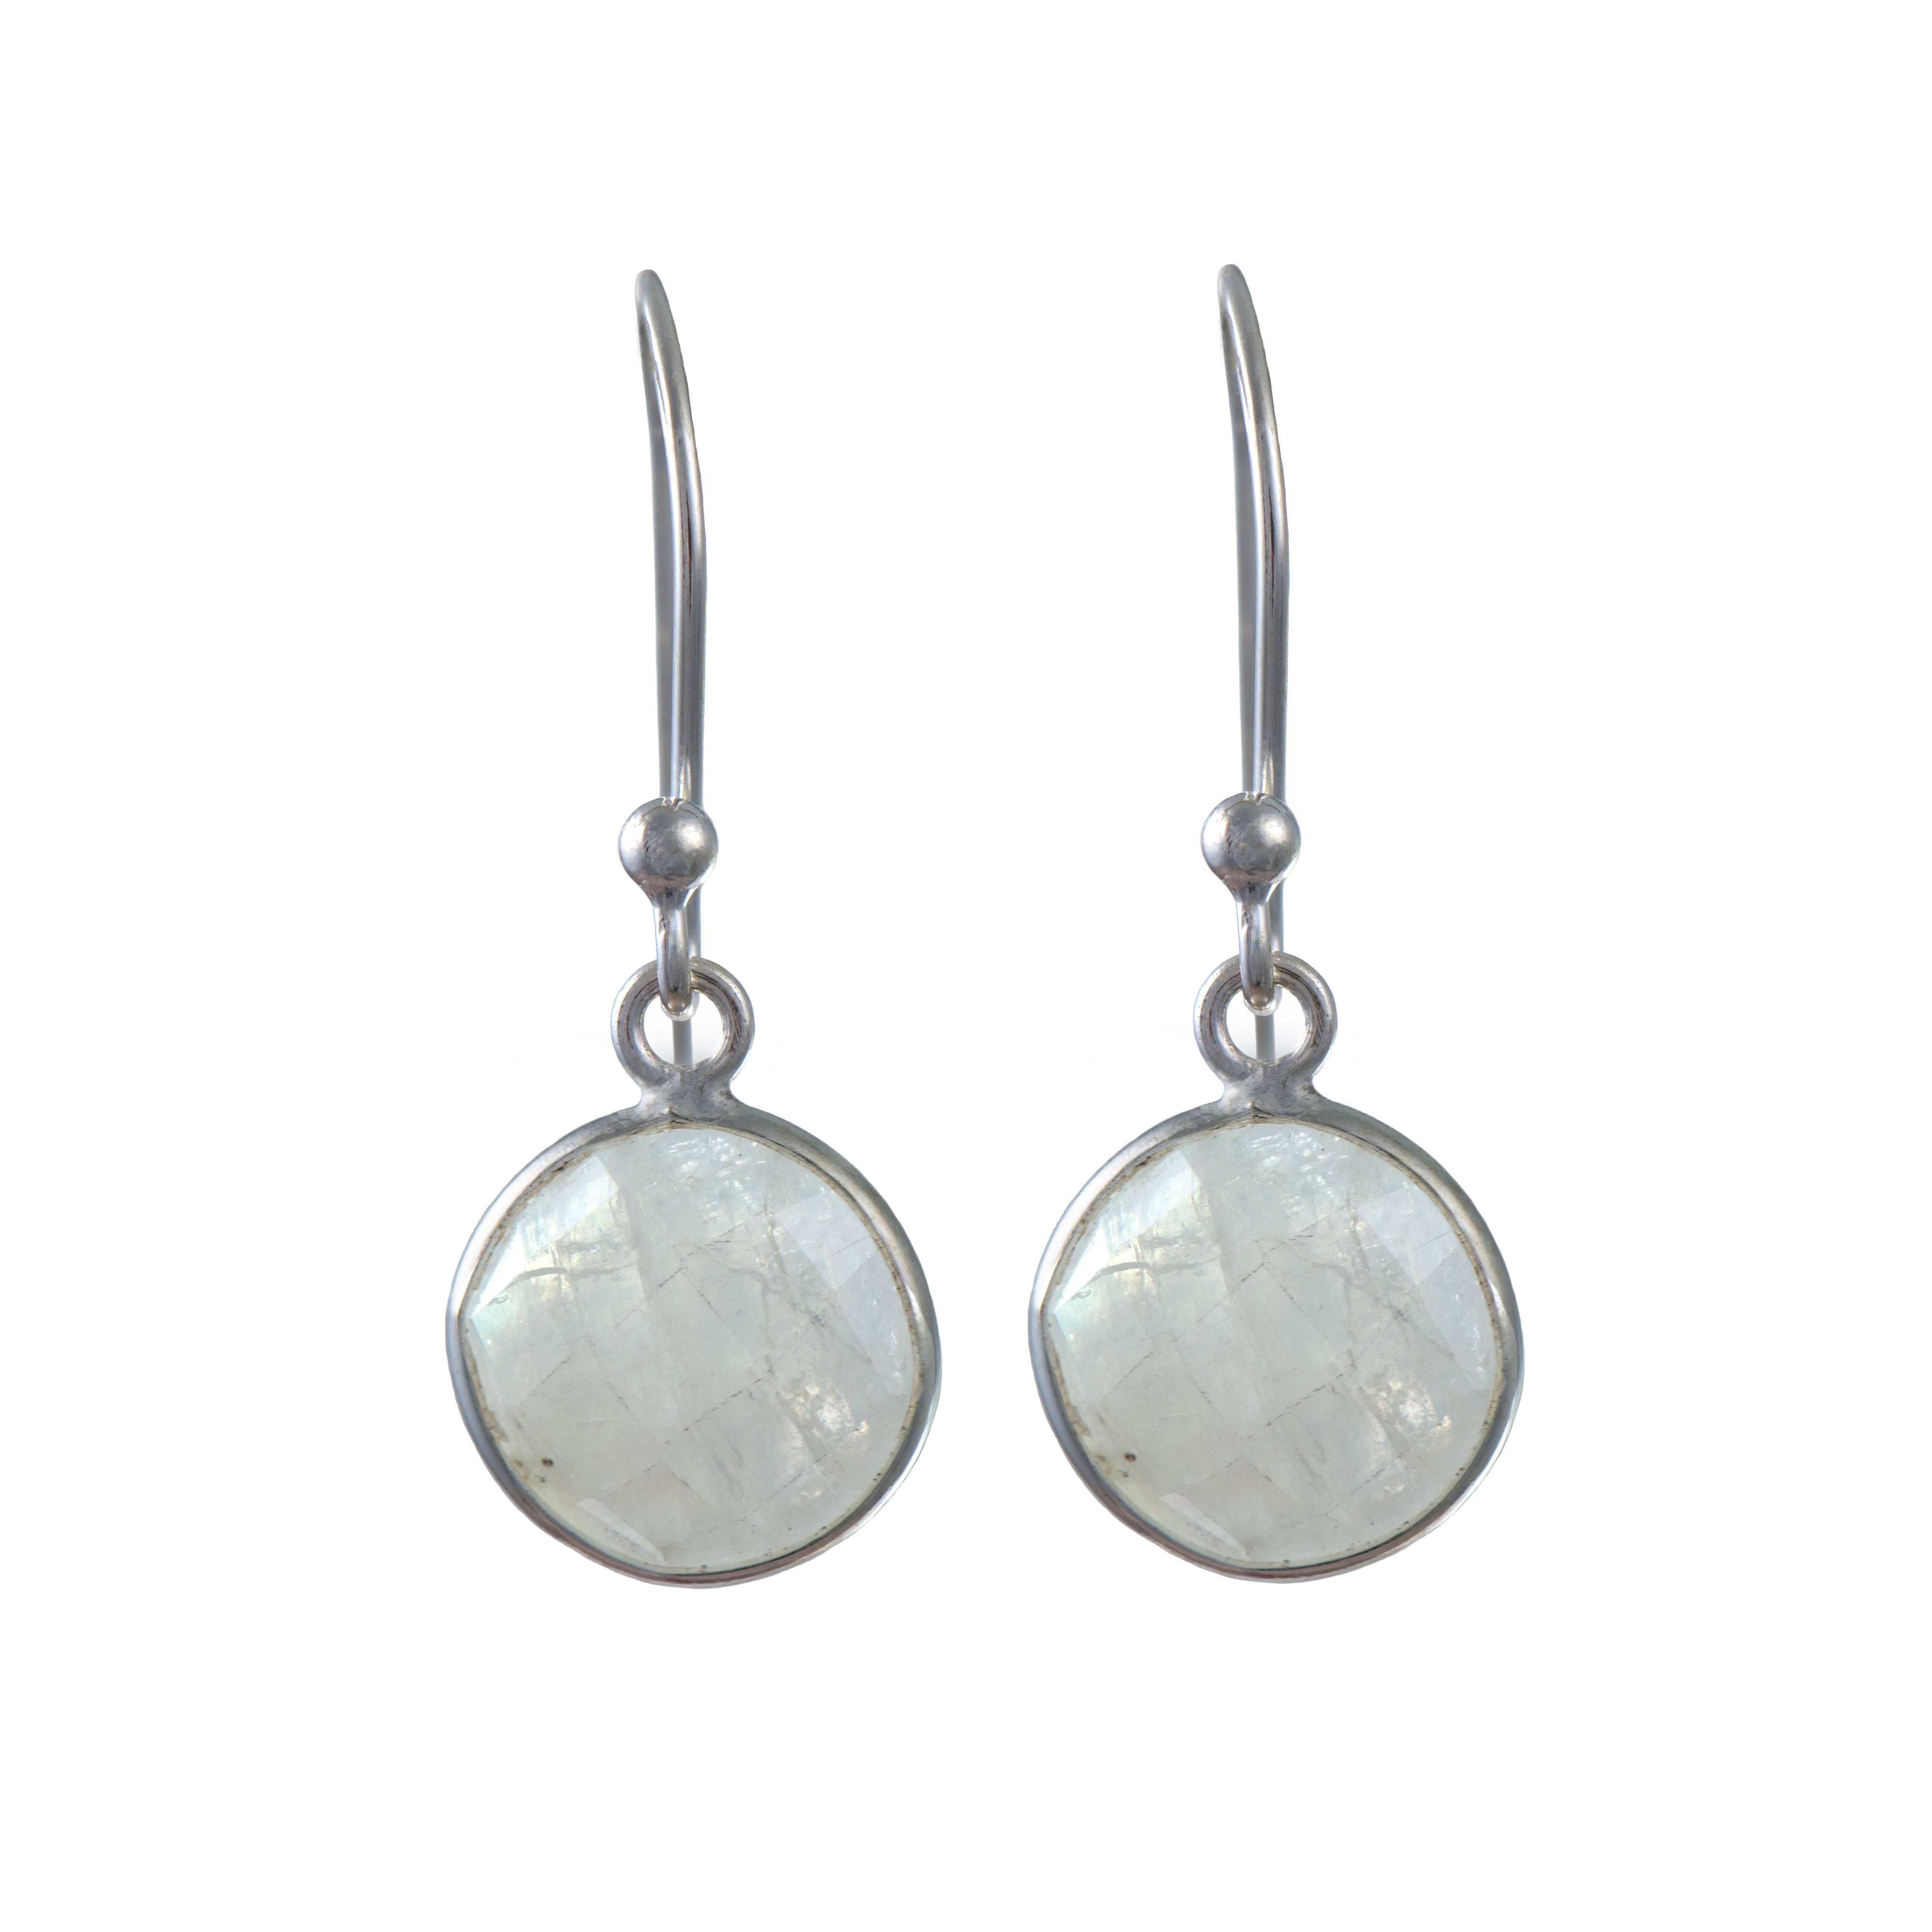 Moonstone Sterling Silver Earrings with a Round Faceted Gemstone Drop